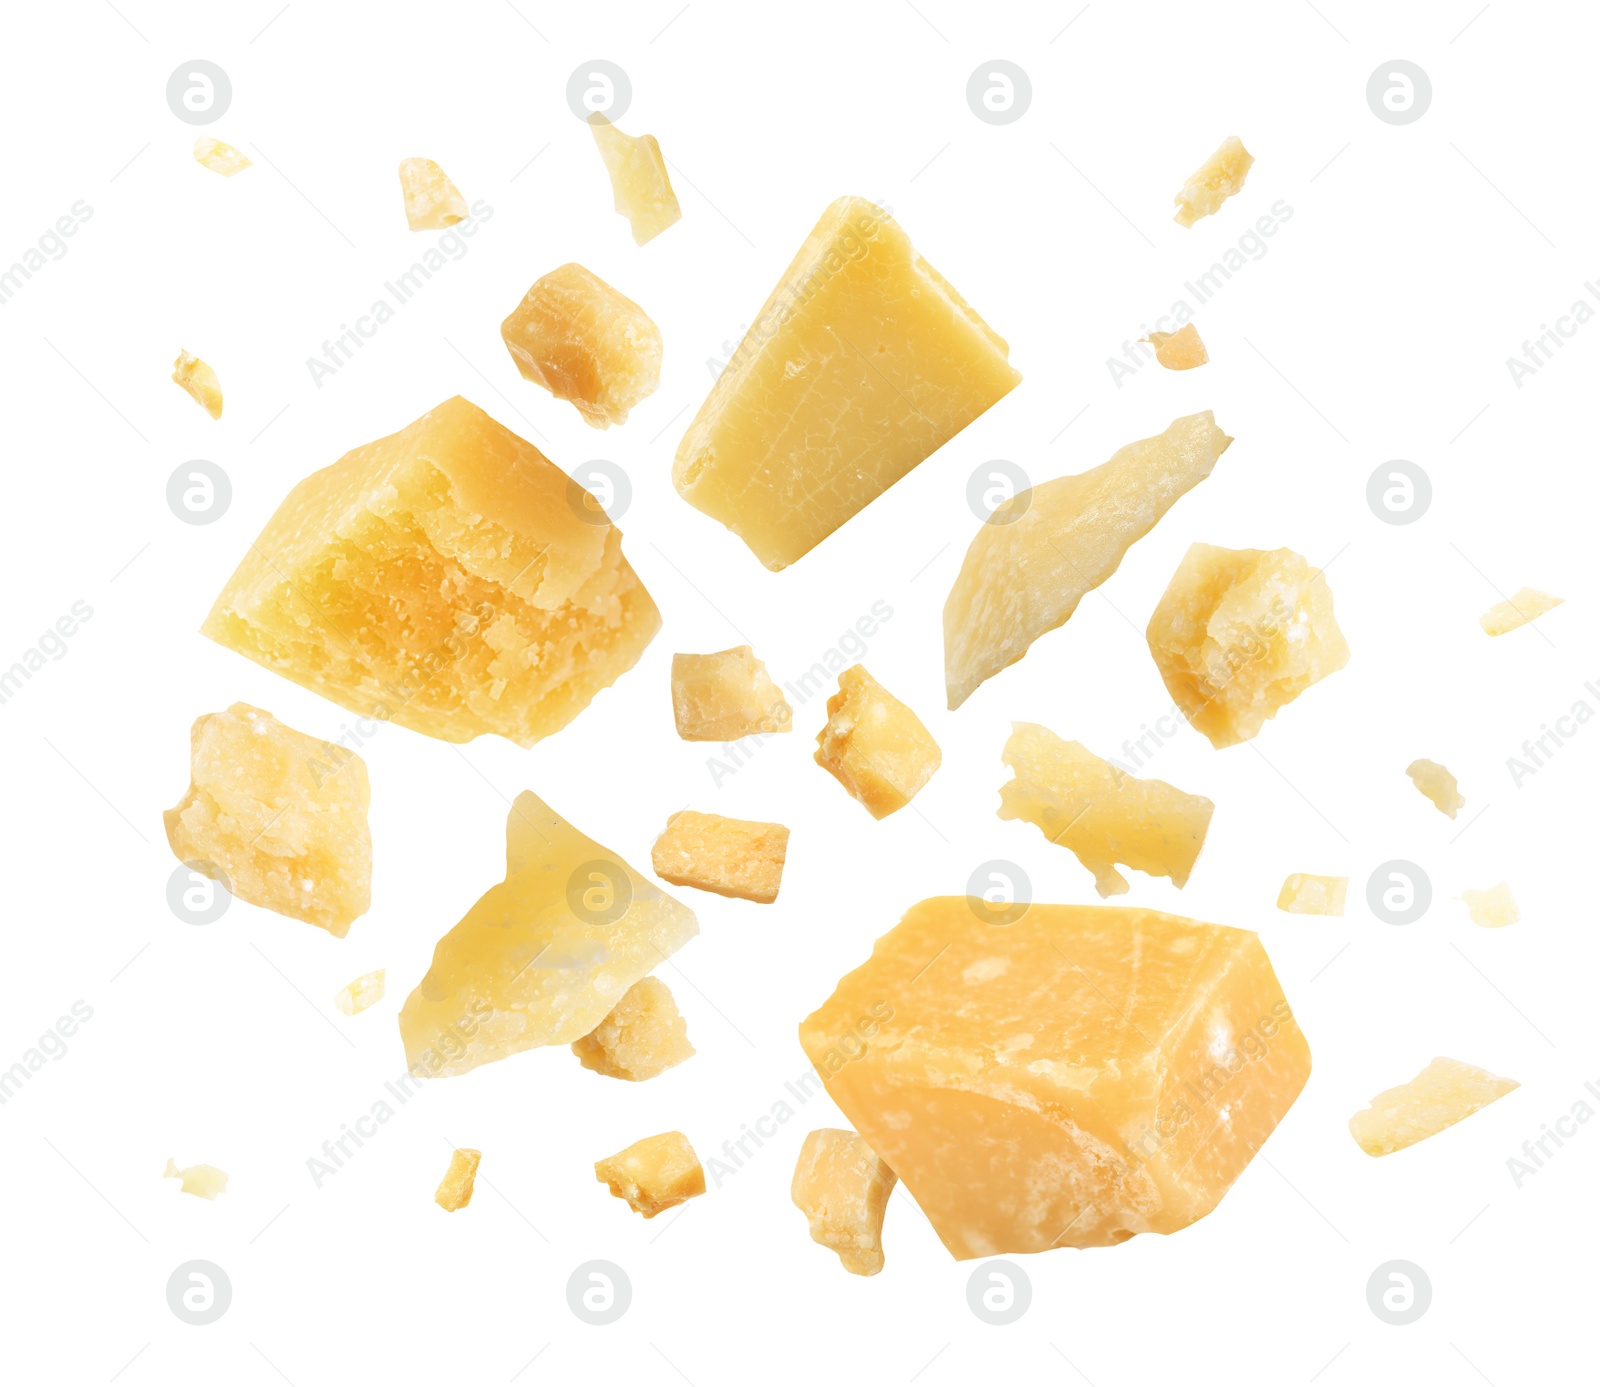 Image of Pieces of delicious parmesan cheese flying on white background